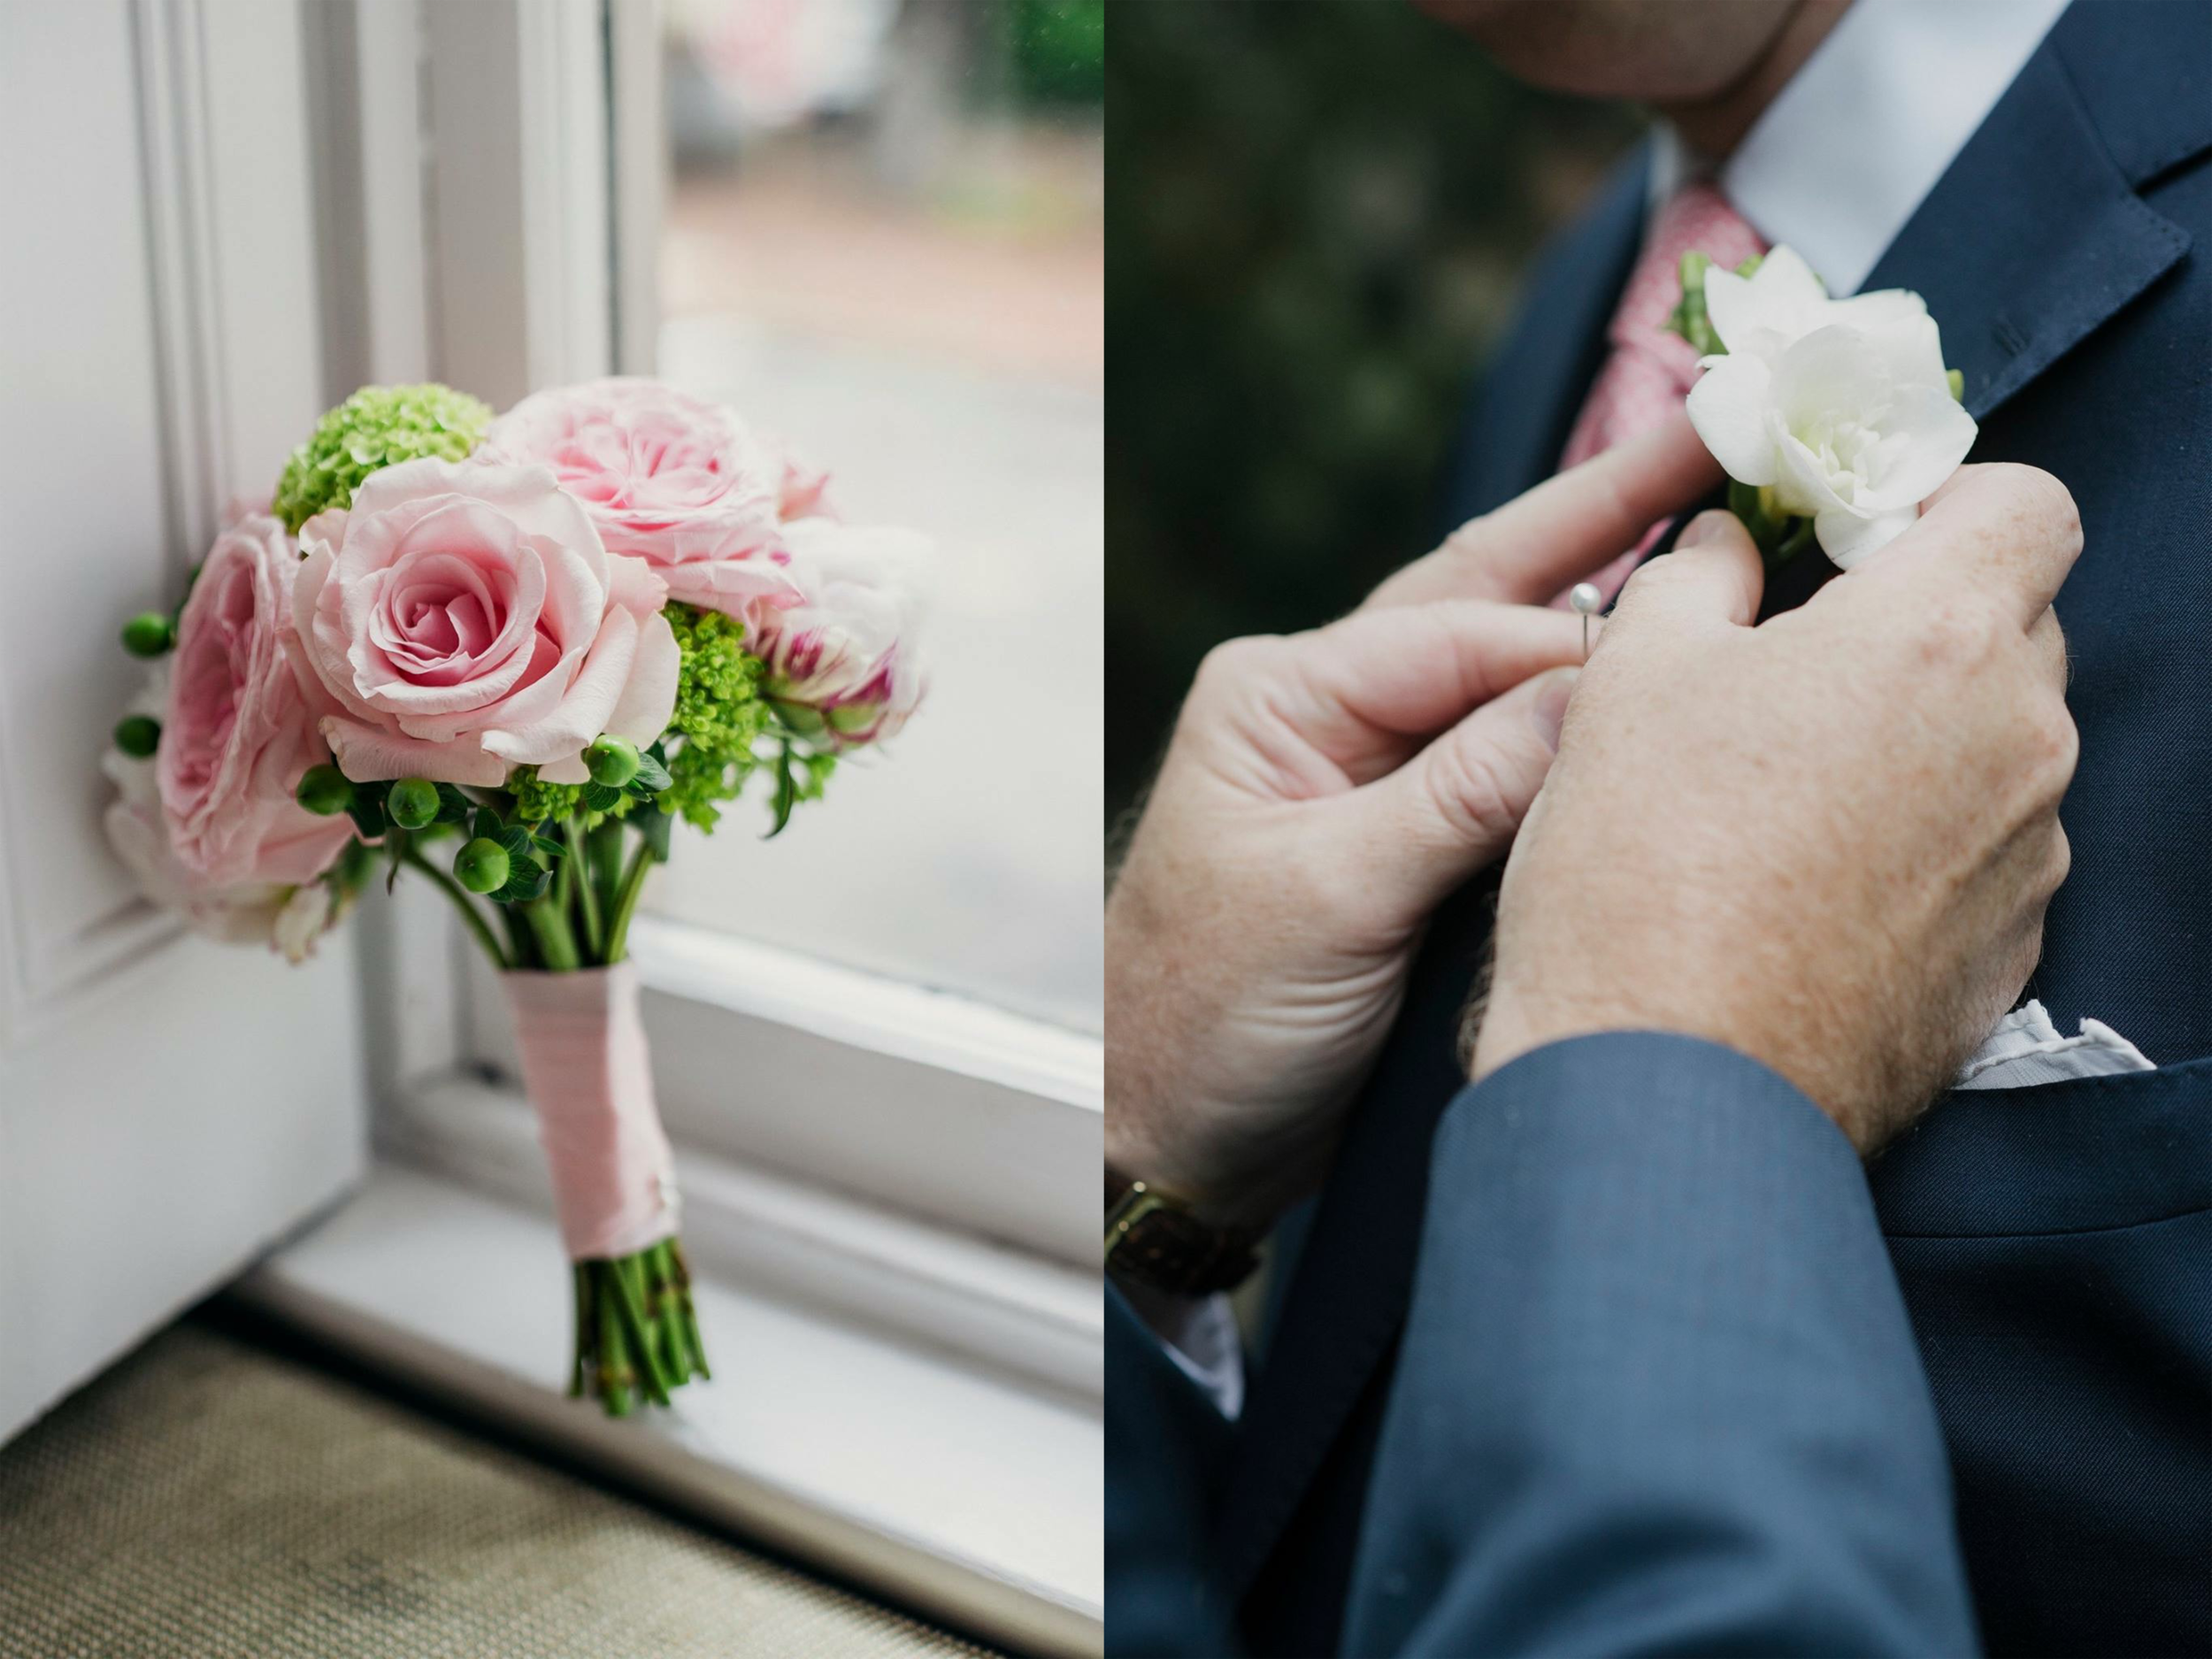 Pink and green flower bouquet for wedding. Man pinning a boutonniere on a lapel.